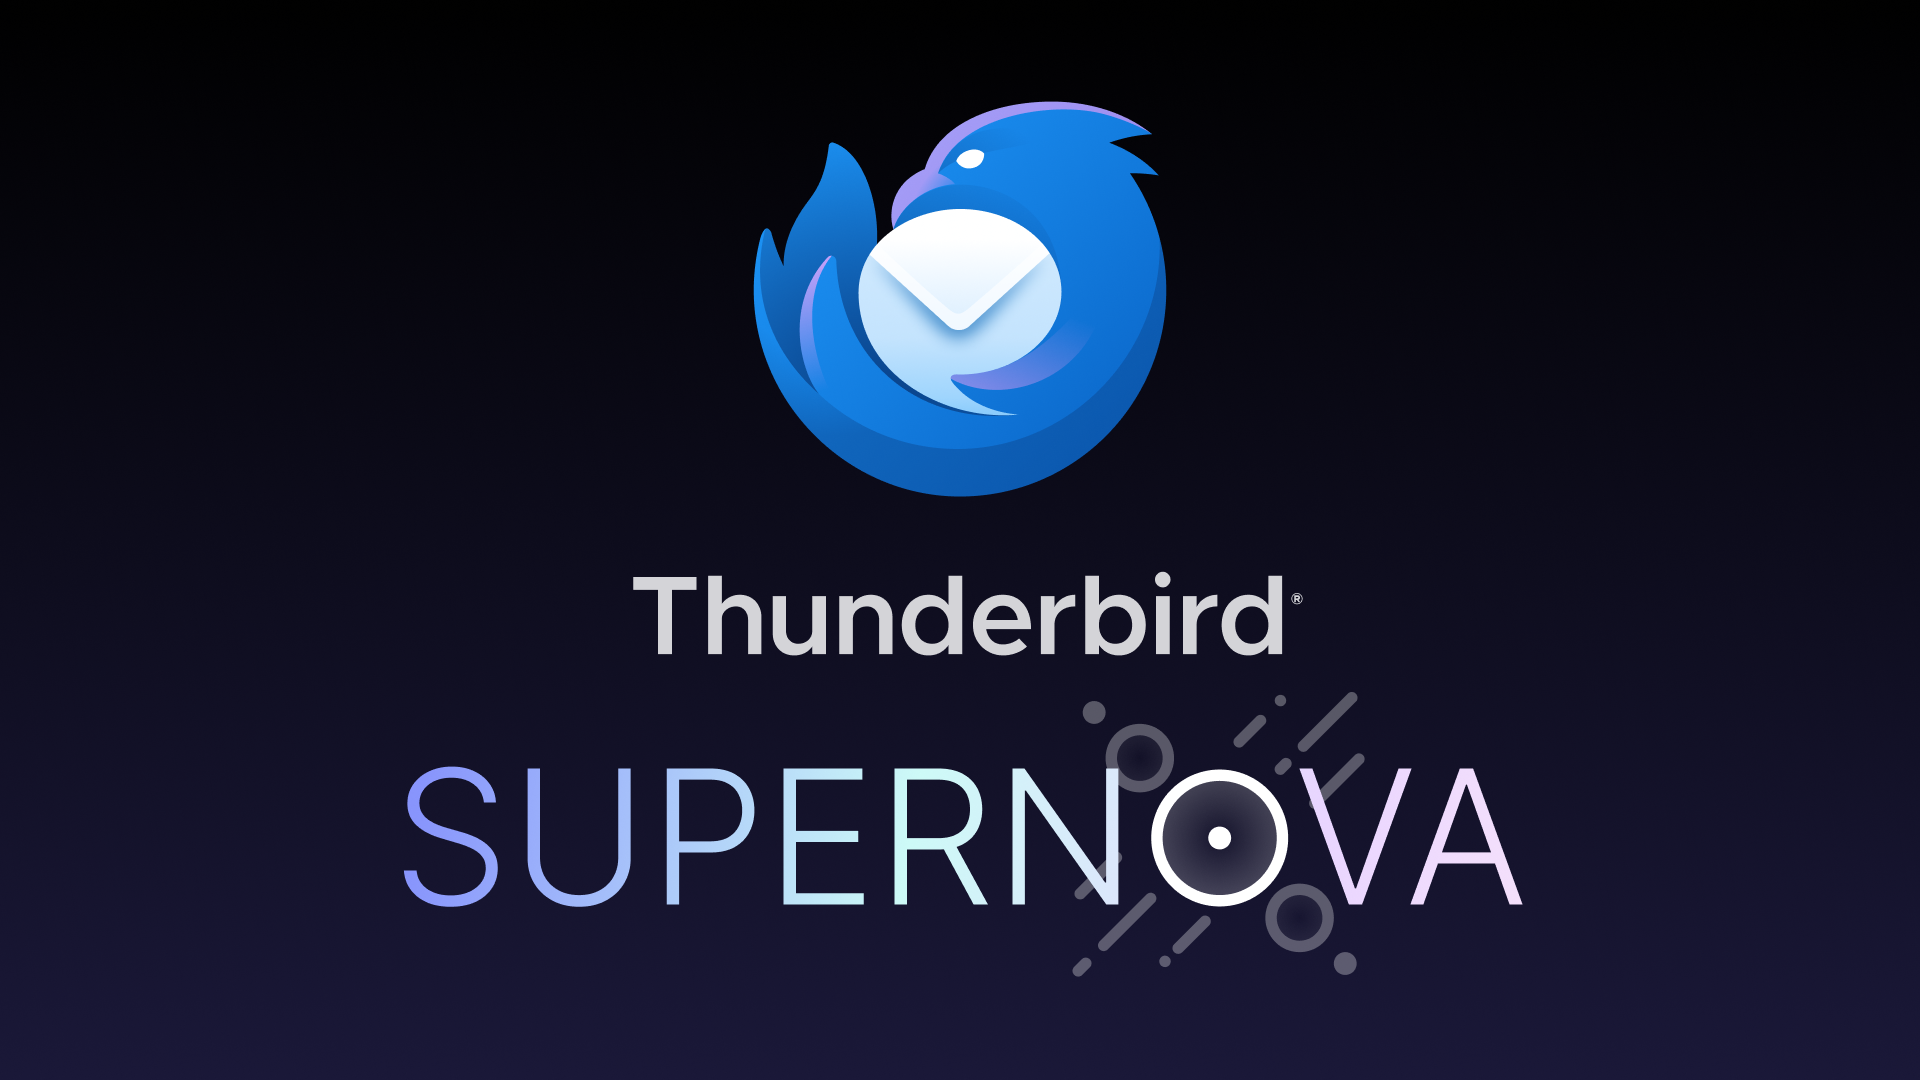 Thunderbird 102 to 115 upgrades are now enabled